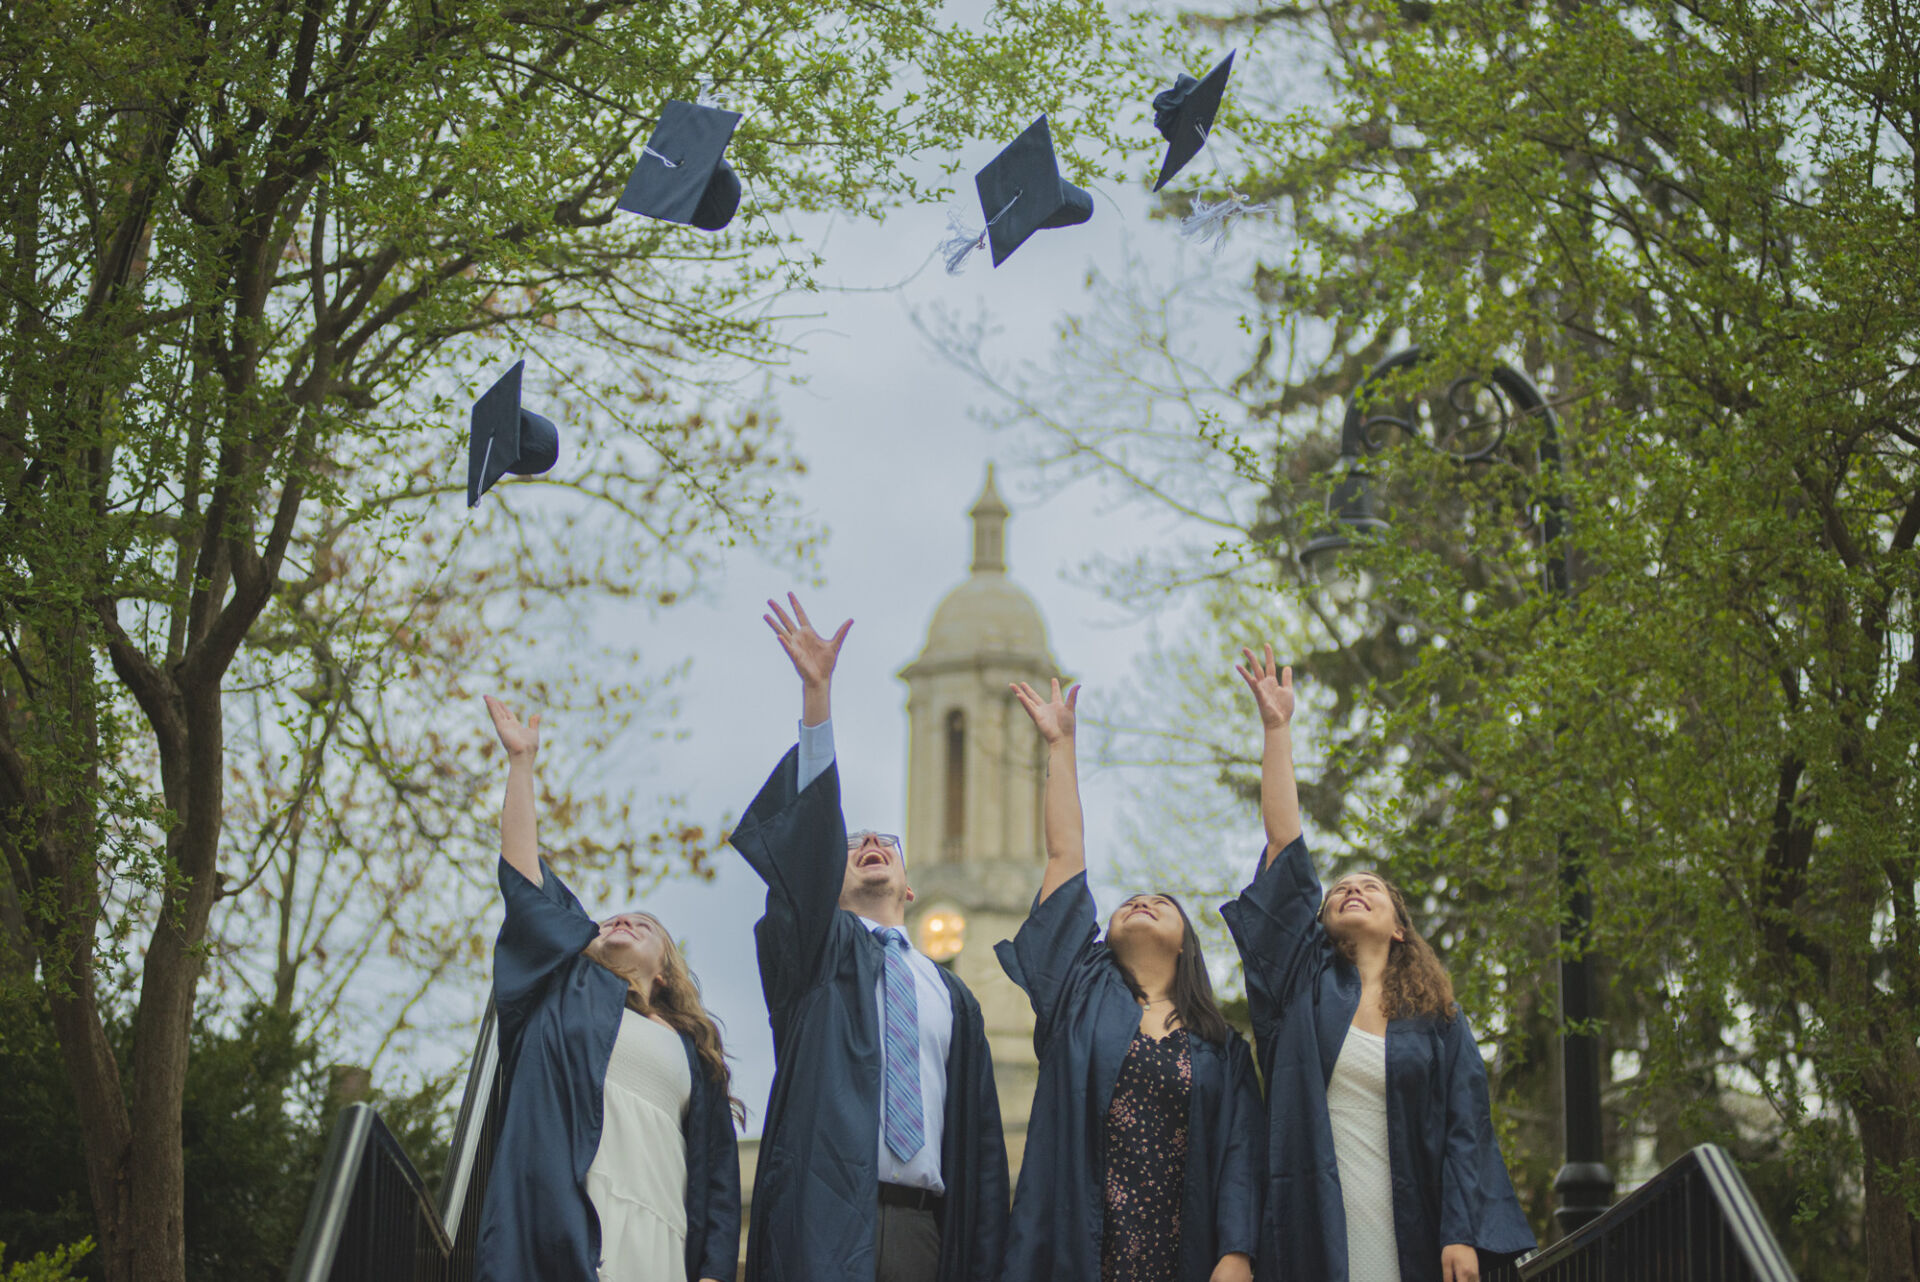 Recent graduates in robes tossing their hats into the air in front of Old Main.